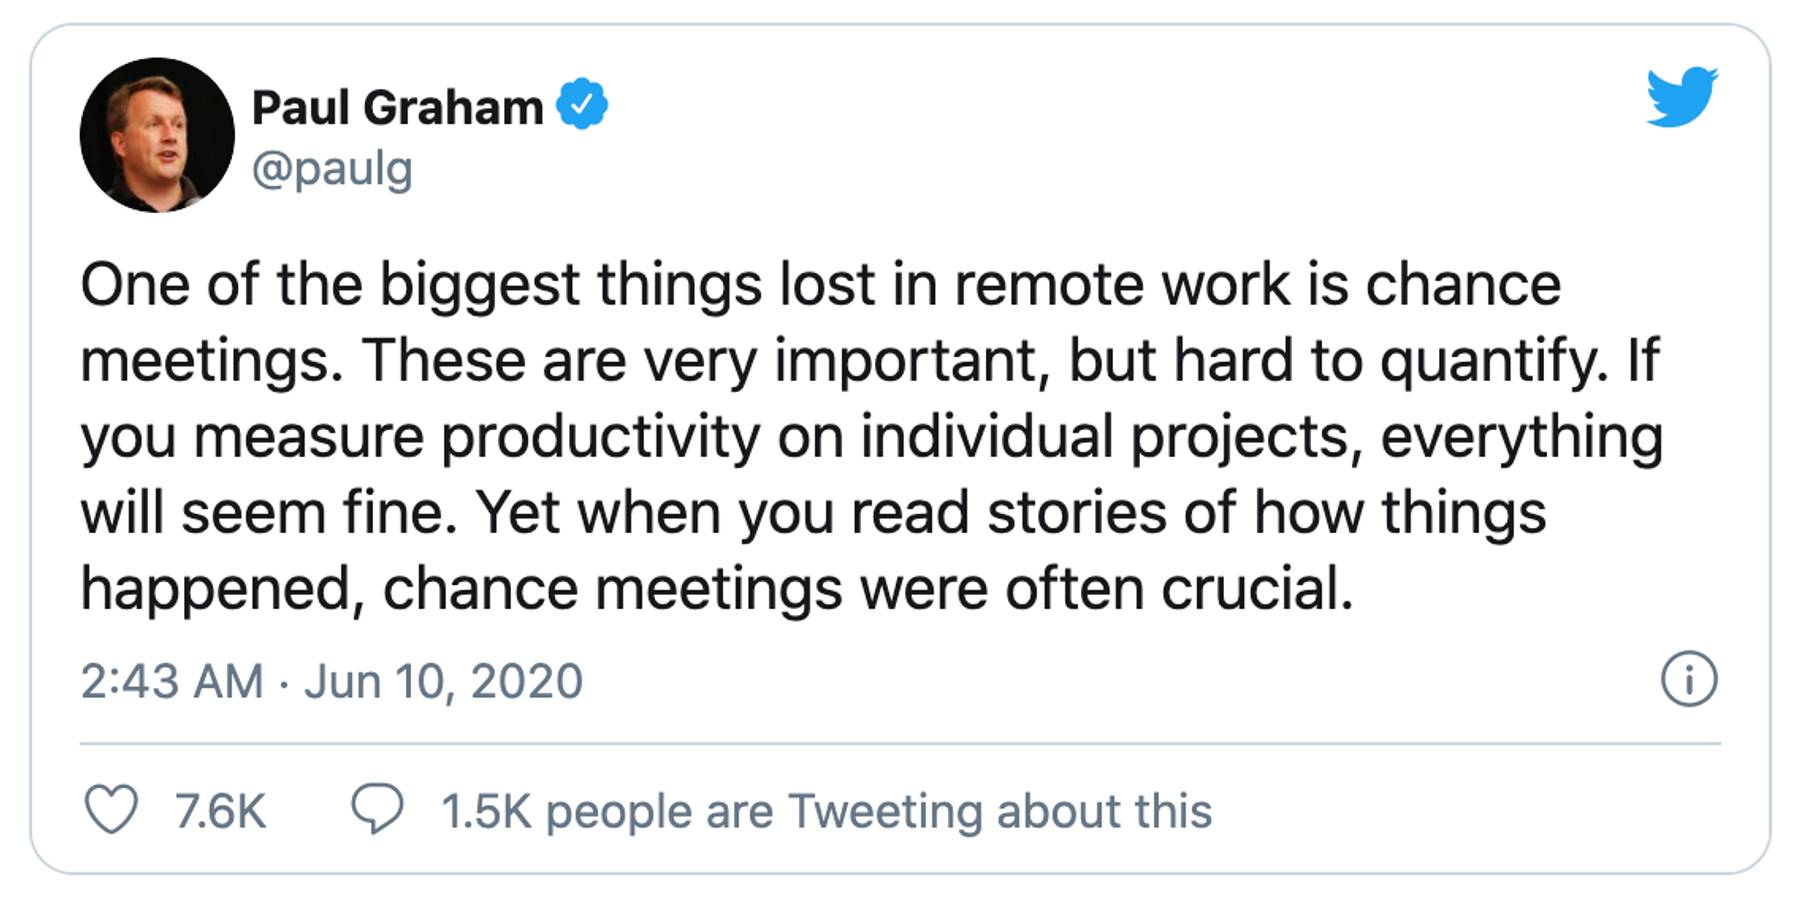 One of the biggest things lost in remote work is chance meetings. These are very important, but hard to quantify. If you measure productivity on individual projects, everything will seem fine. Yet when you read stories of how things happened, chance meetings were often crucial.